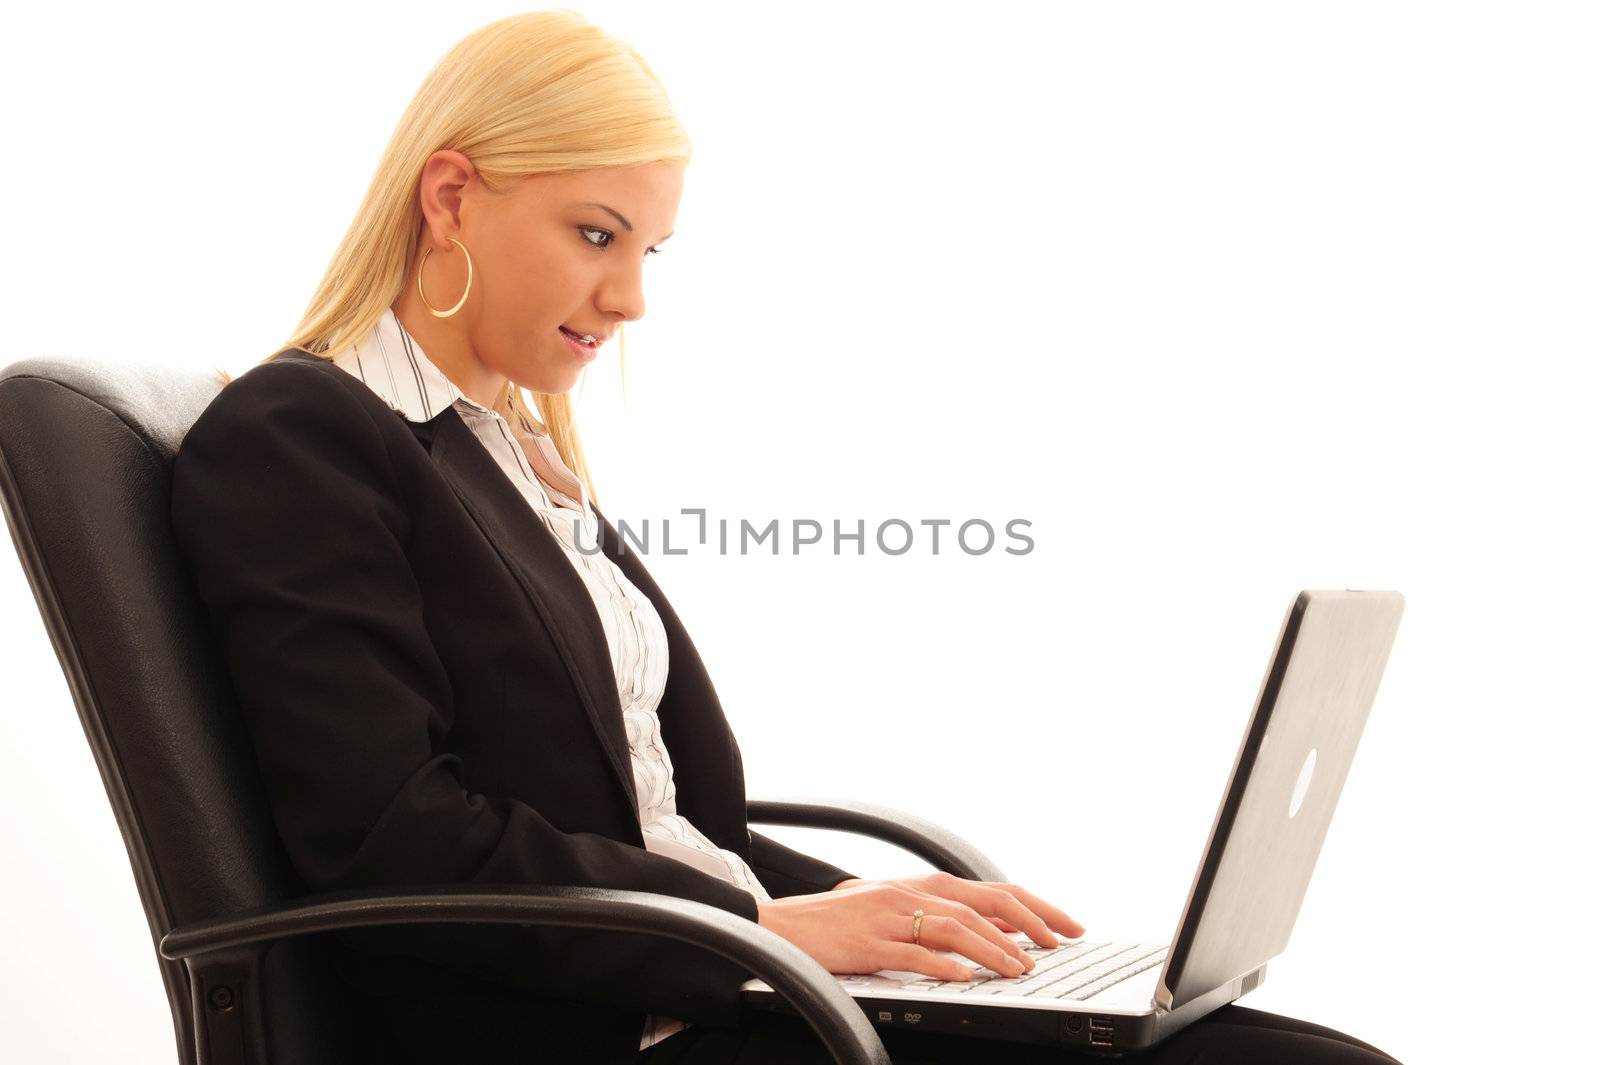 Young confident business woman with blonde hair, typing on a laptop in a stylish dark suit, sitting on a leather chair and a white background.